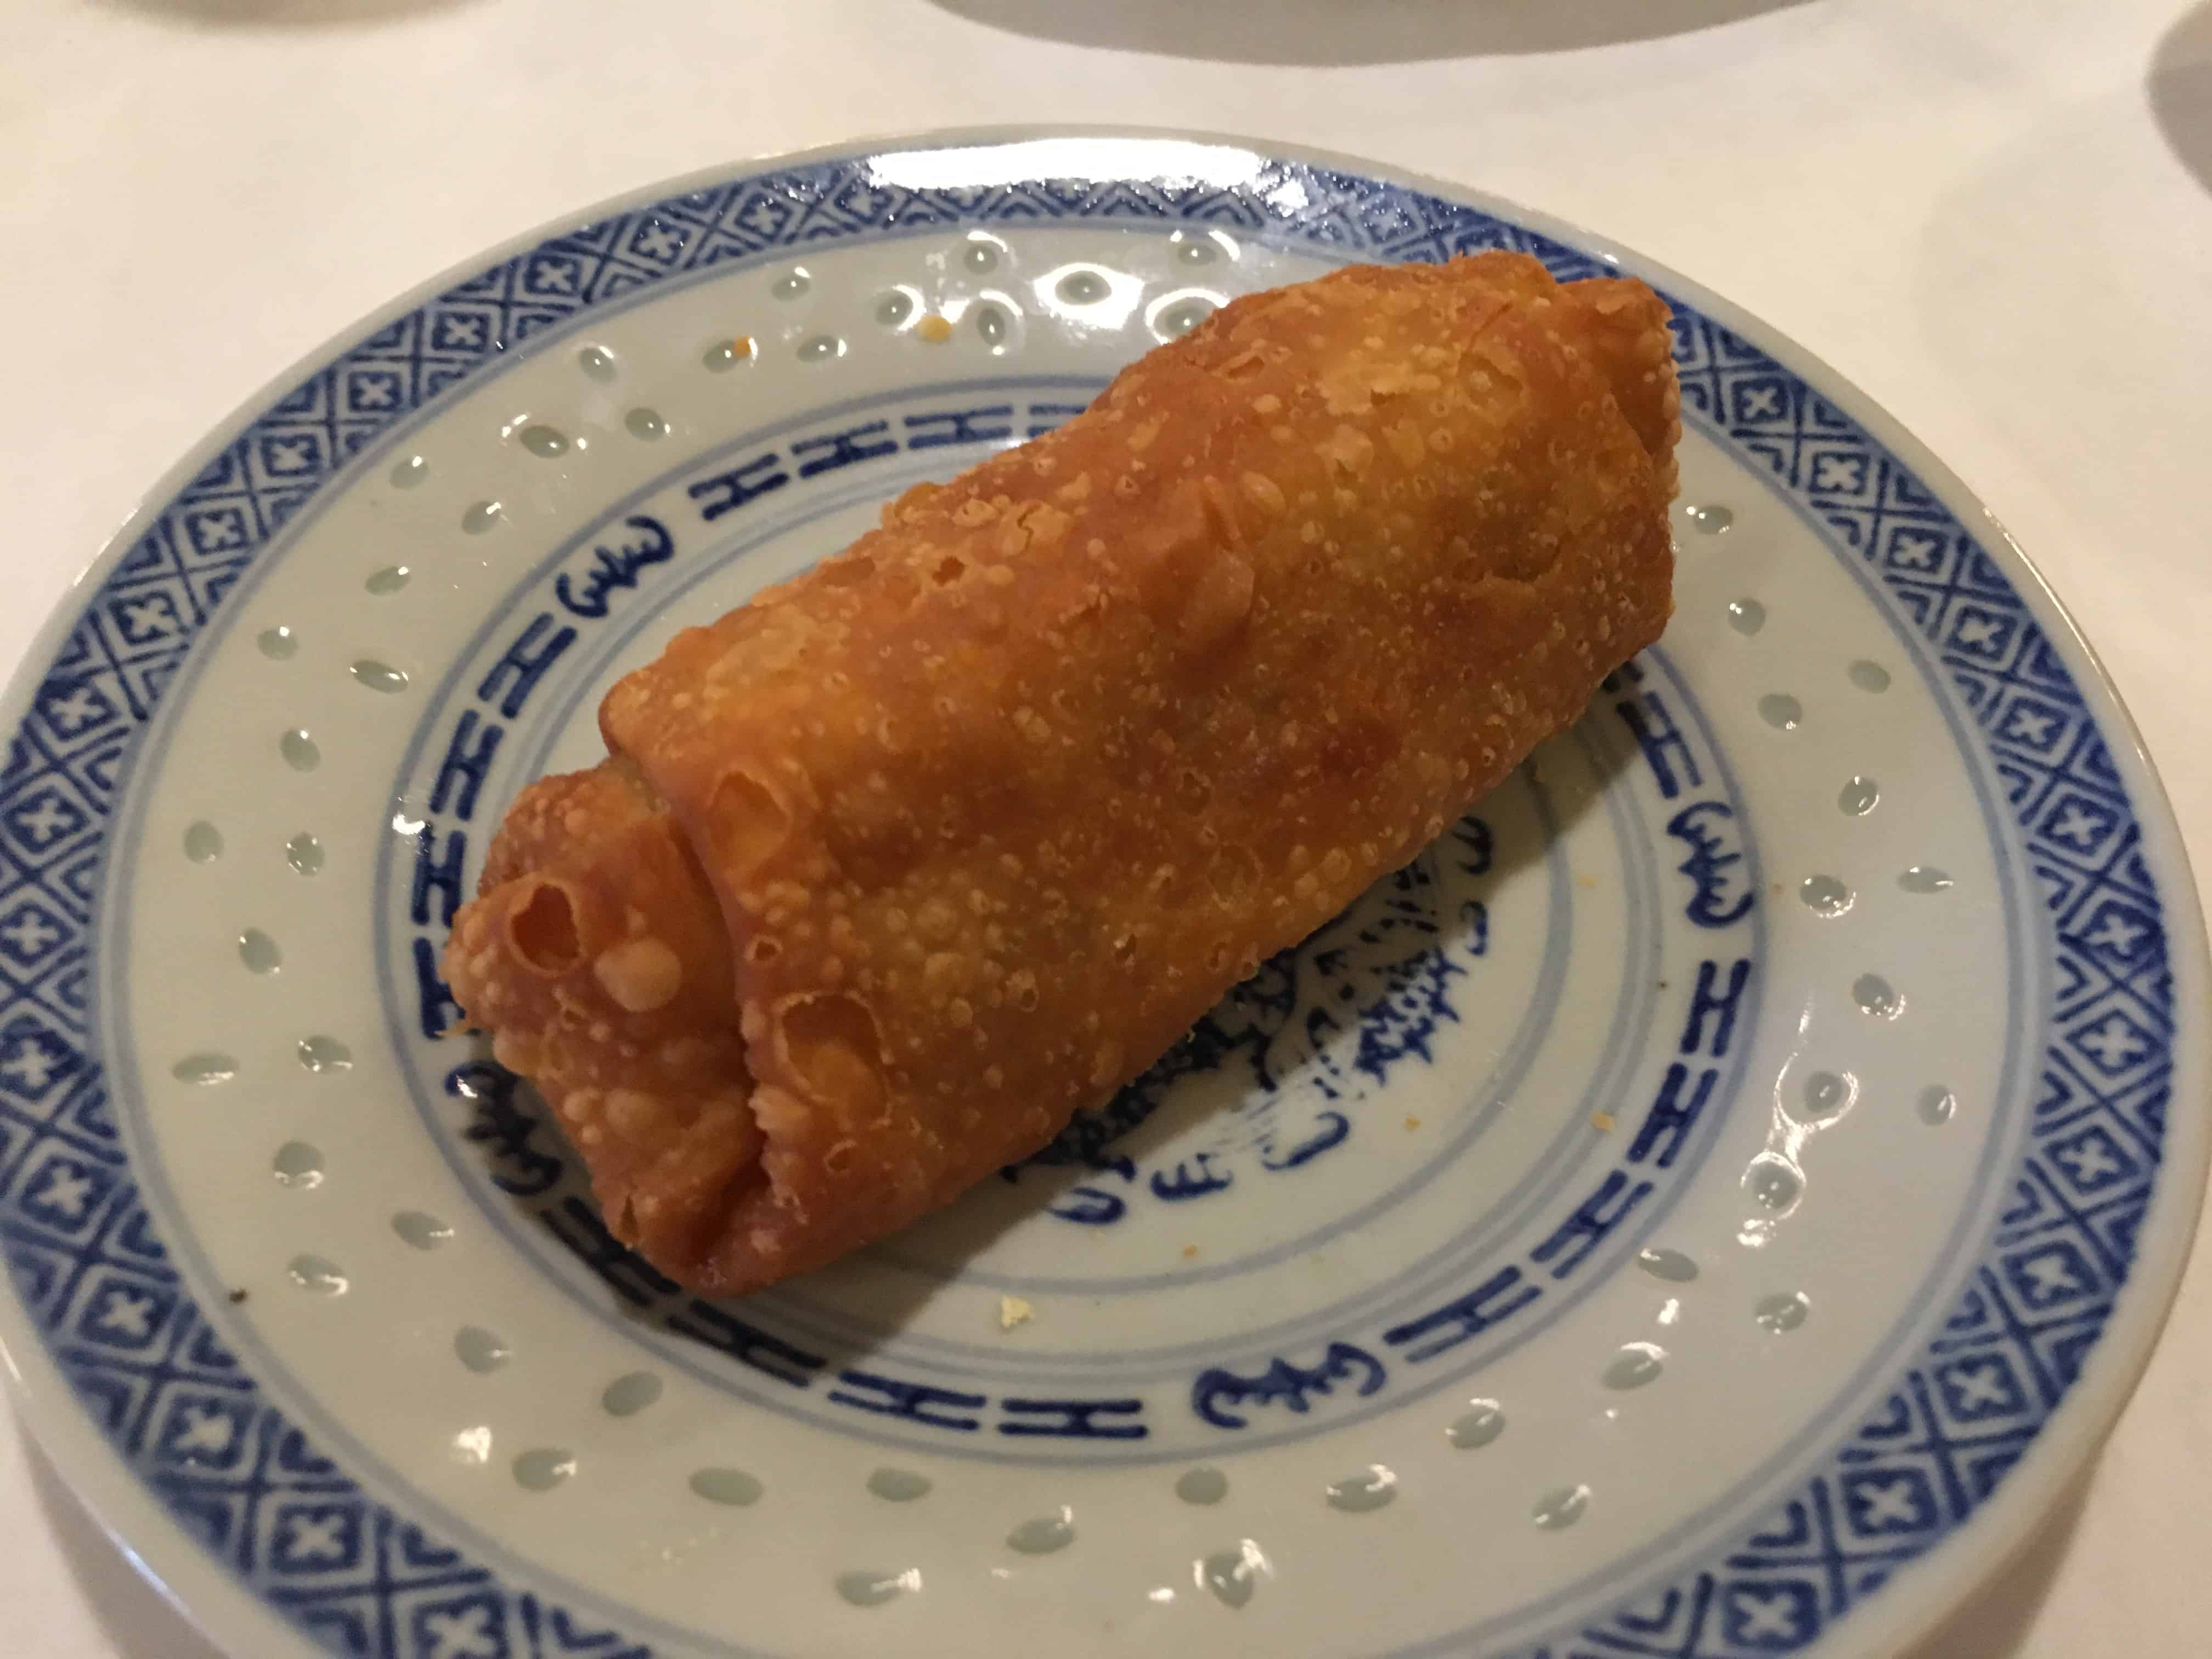 Egg roll at Emperor's Choice